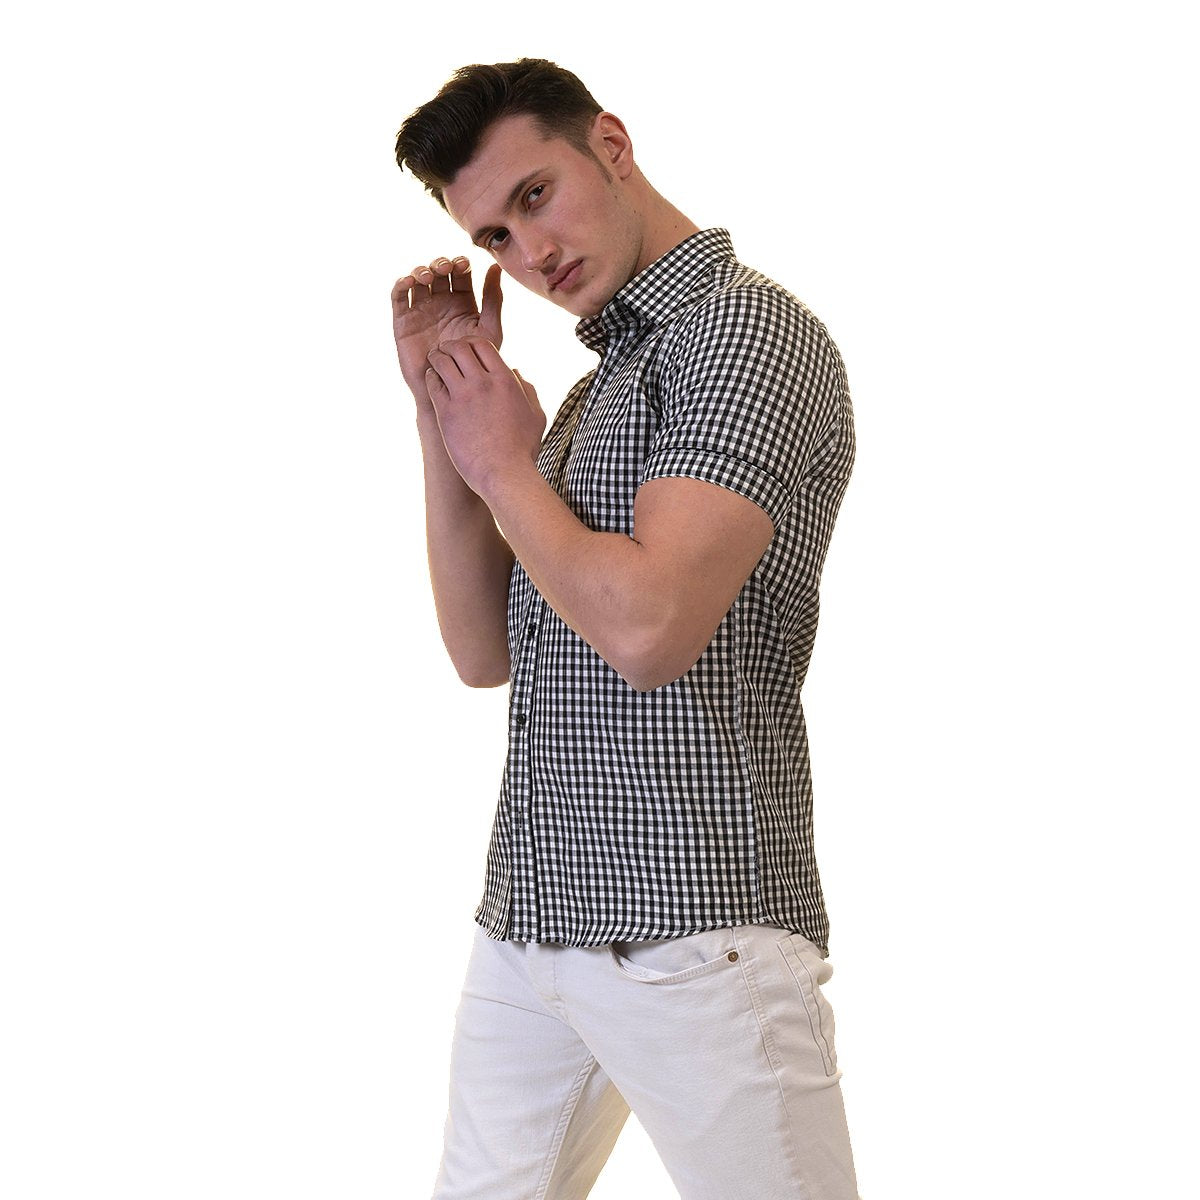 Picture of a Premium Men's Short Sleeve Button Up Shirt in Black and White side view